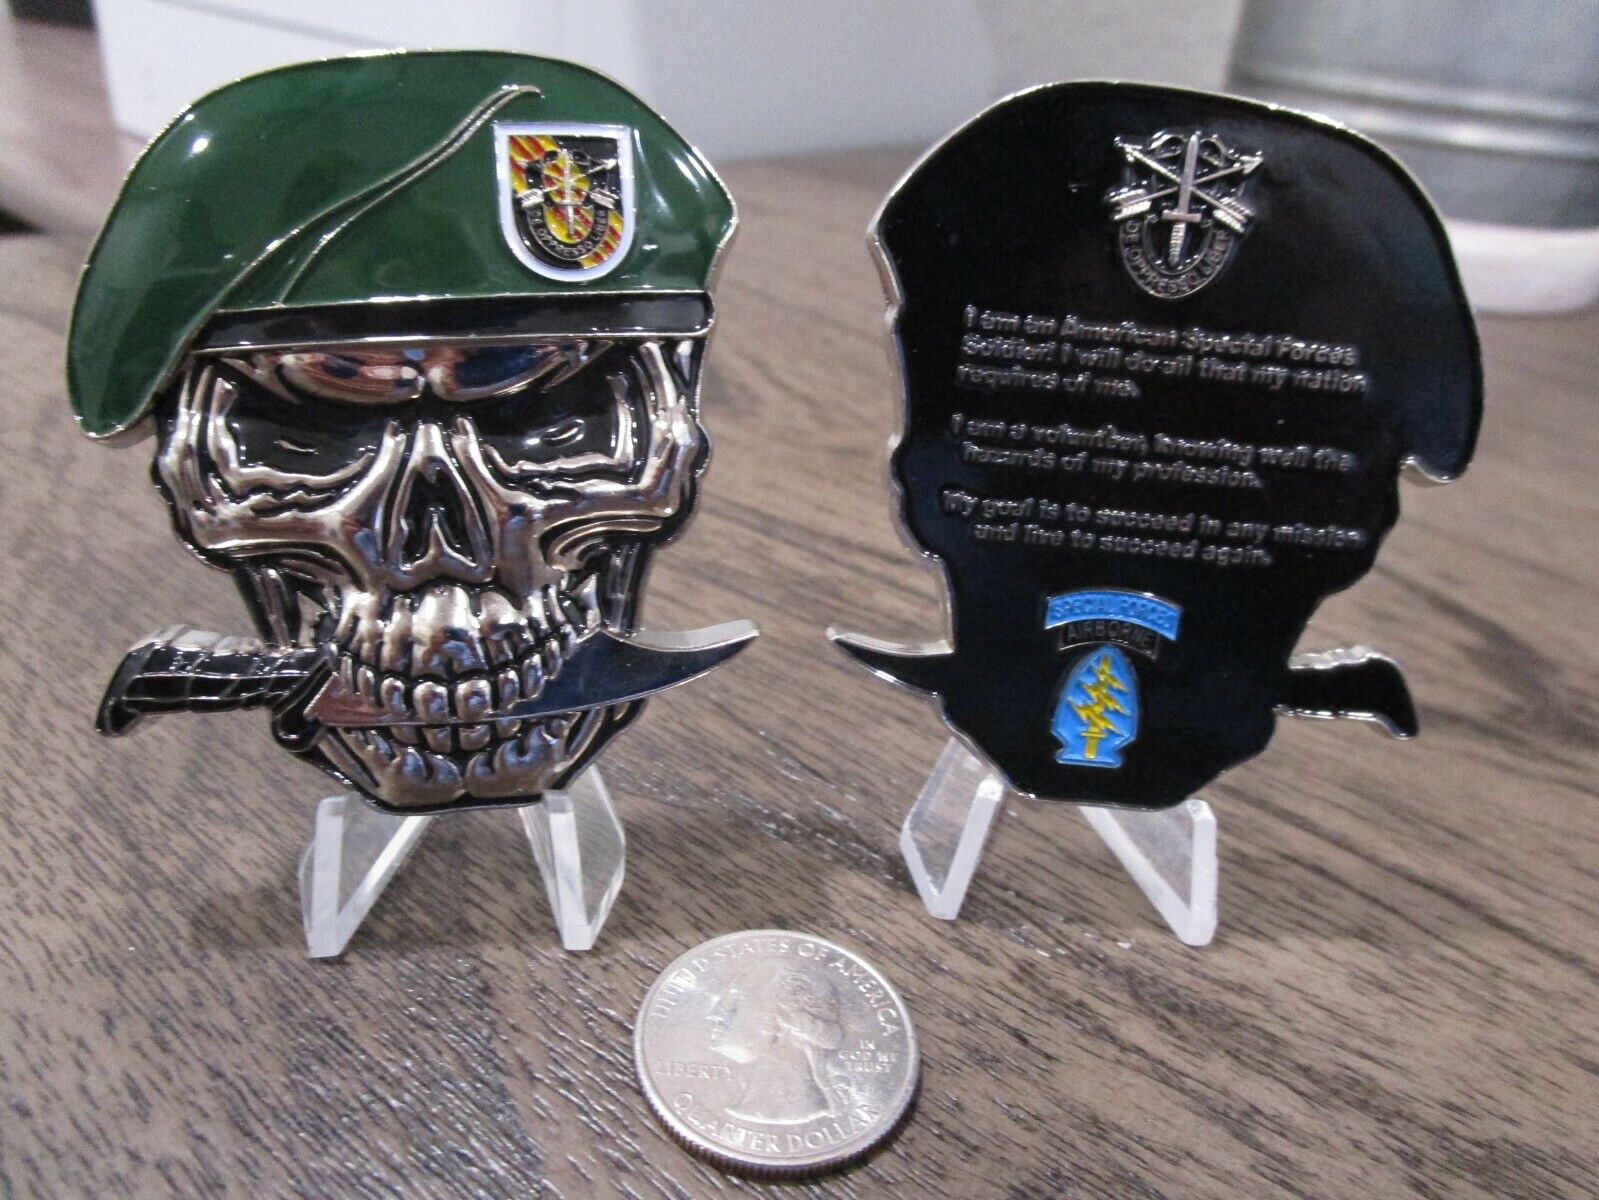 US Army Special Forces Group Creed Green Berets 5th SFG (A) Skull Challenge Coin